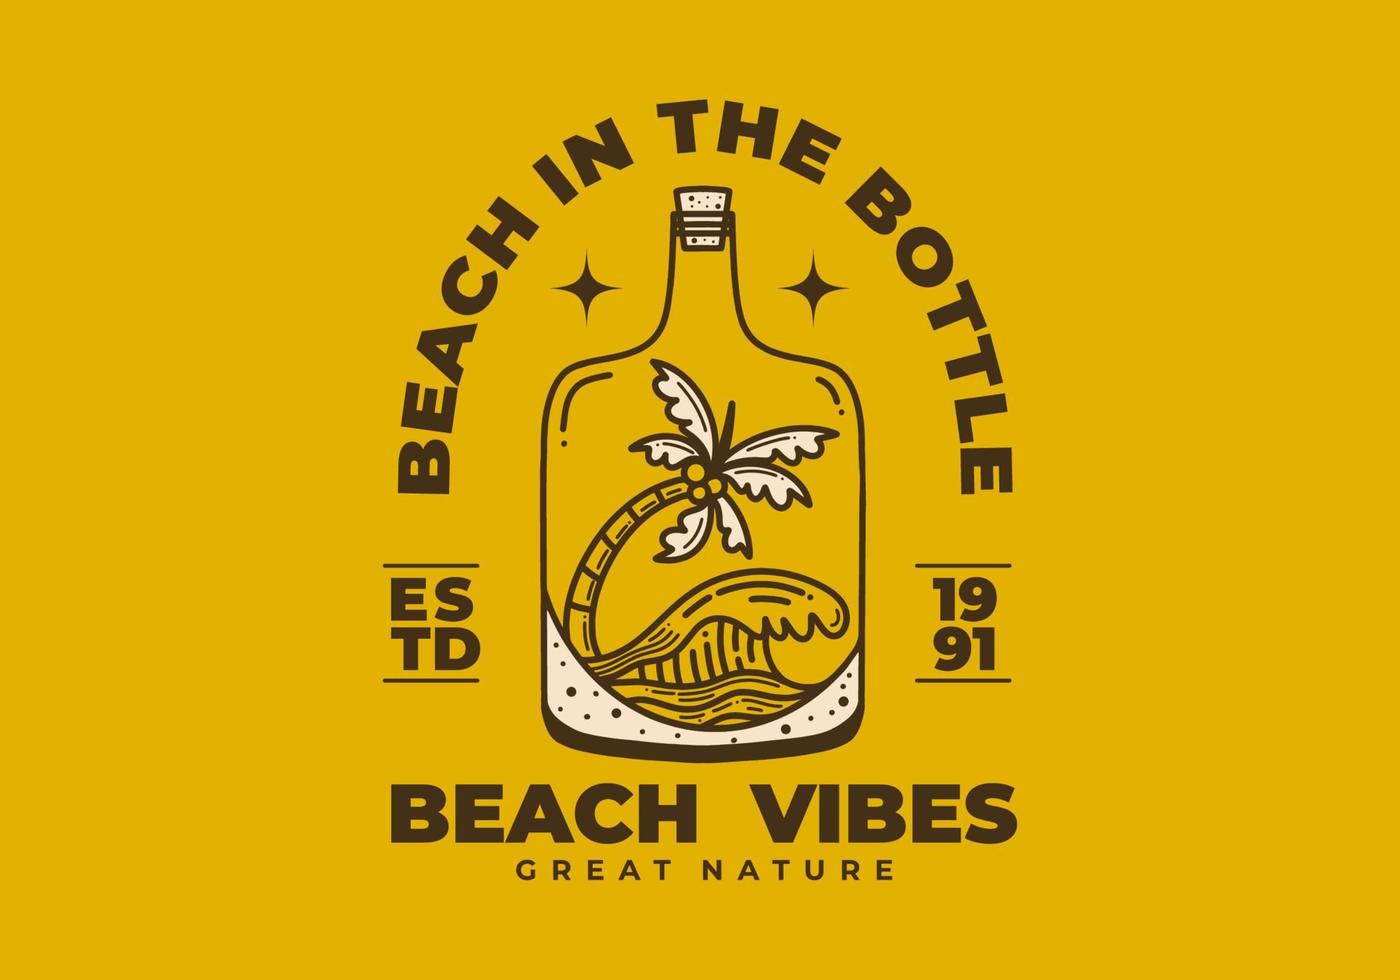 Vintage art illustration of a beach in the bottle vector